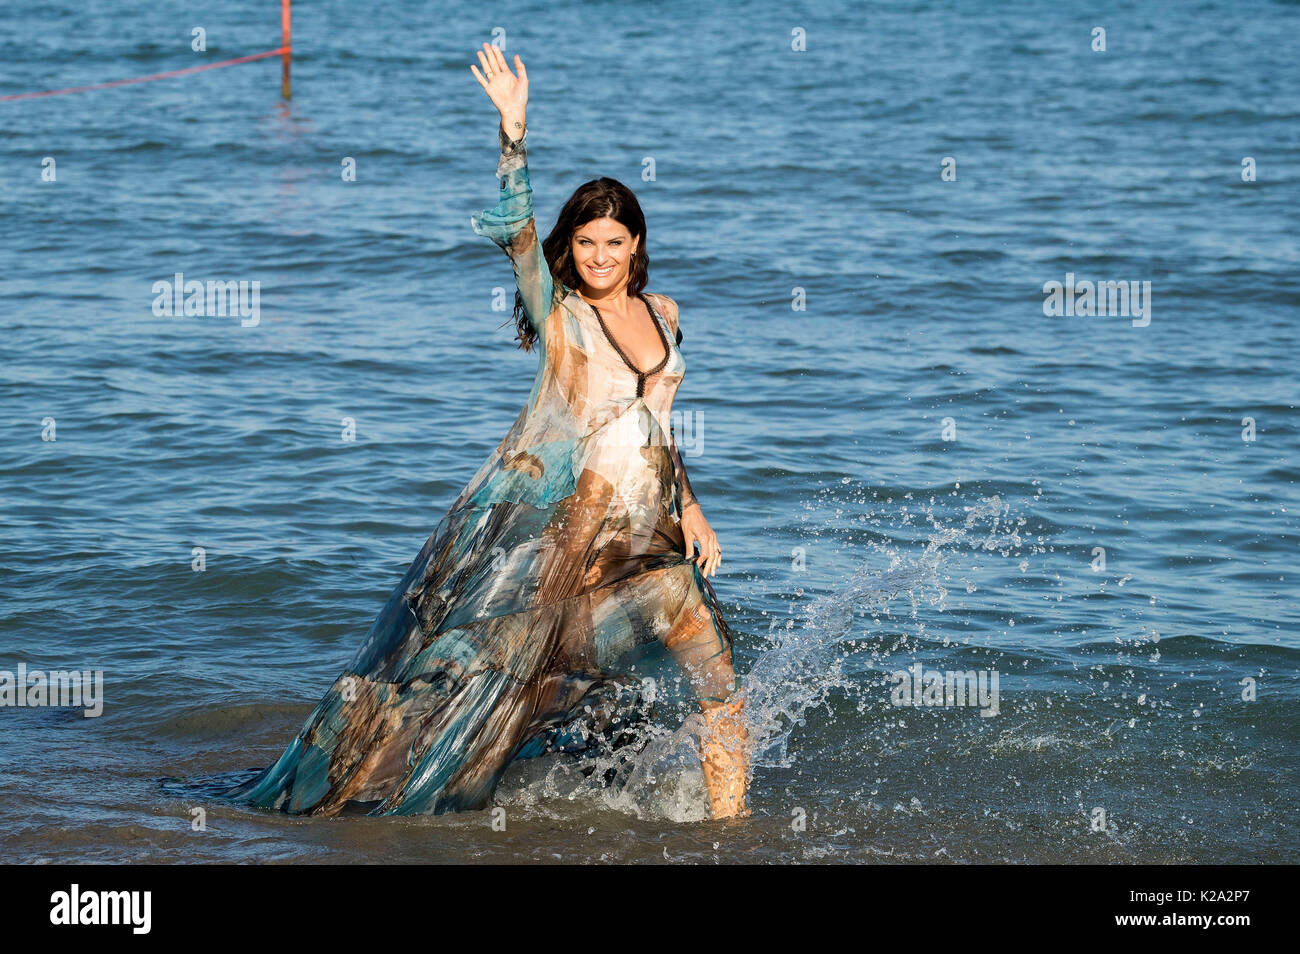 Isabeli Fontana during a photocall ahead of the 74th Venice Film Festival 2017 on August 29, 2017 in Venice, Italy. Stock Photo